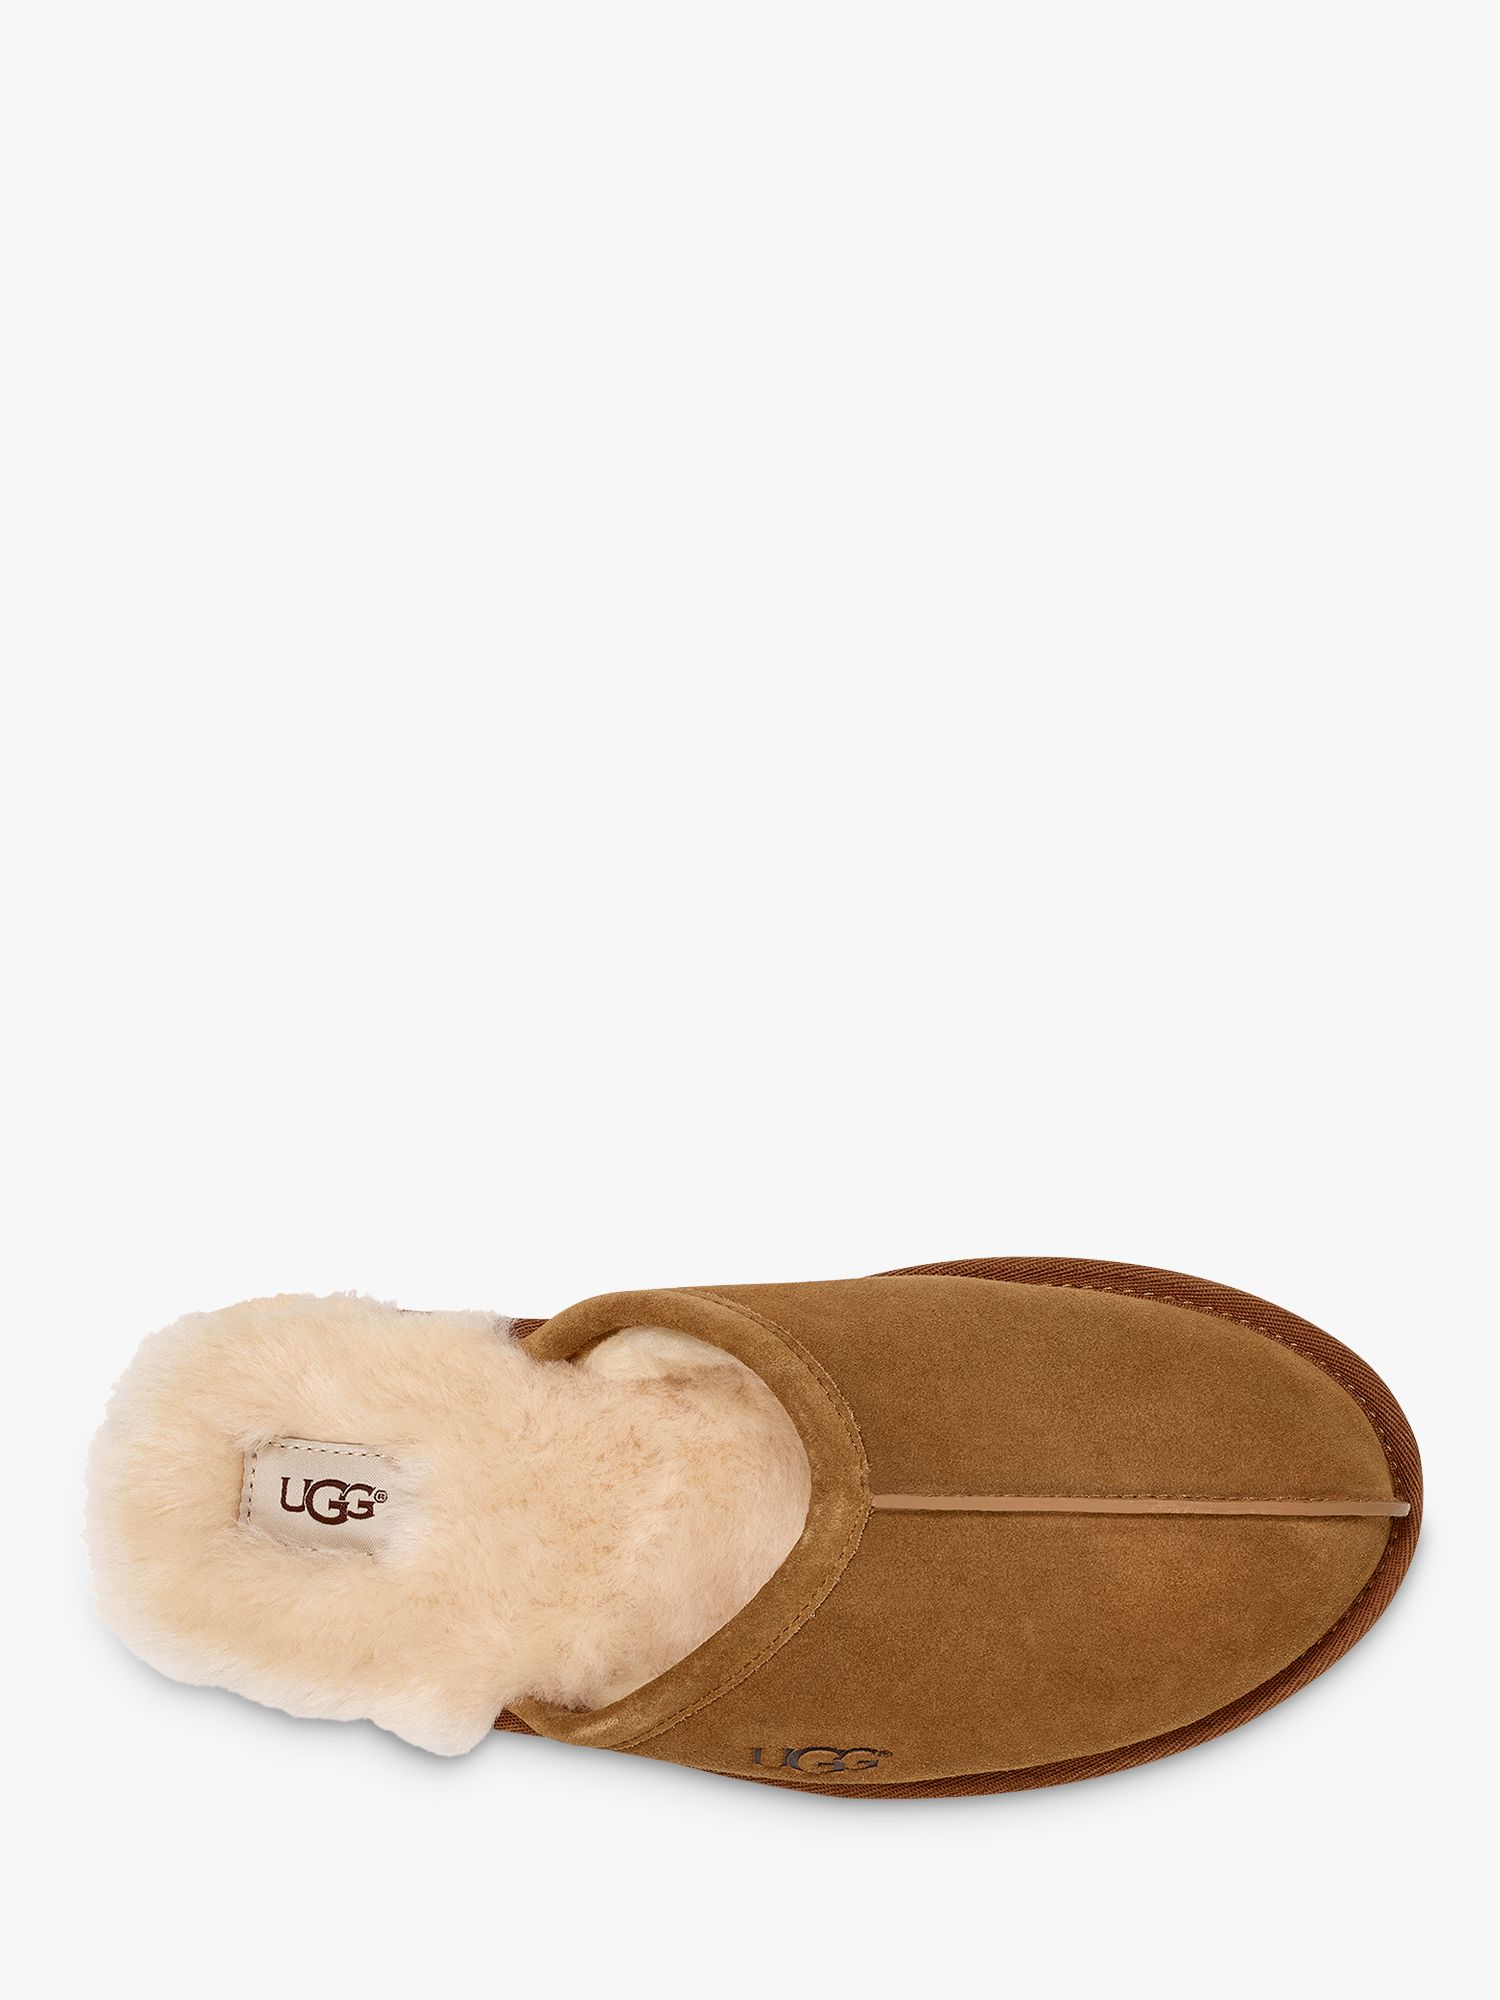 UGG Scuff Suede Slippers, Chestnut at John Lewis & Partners